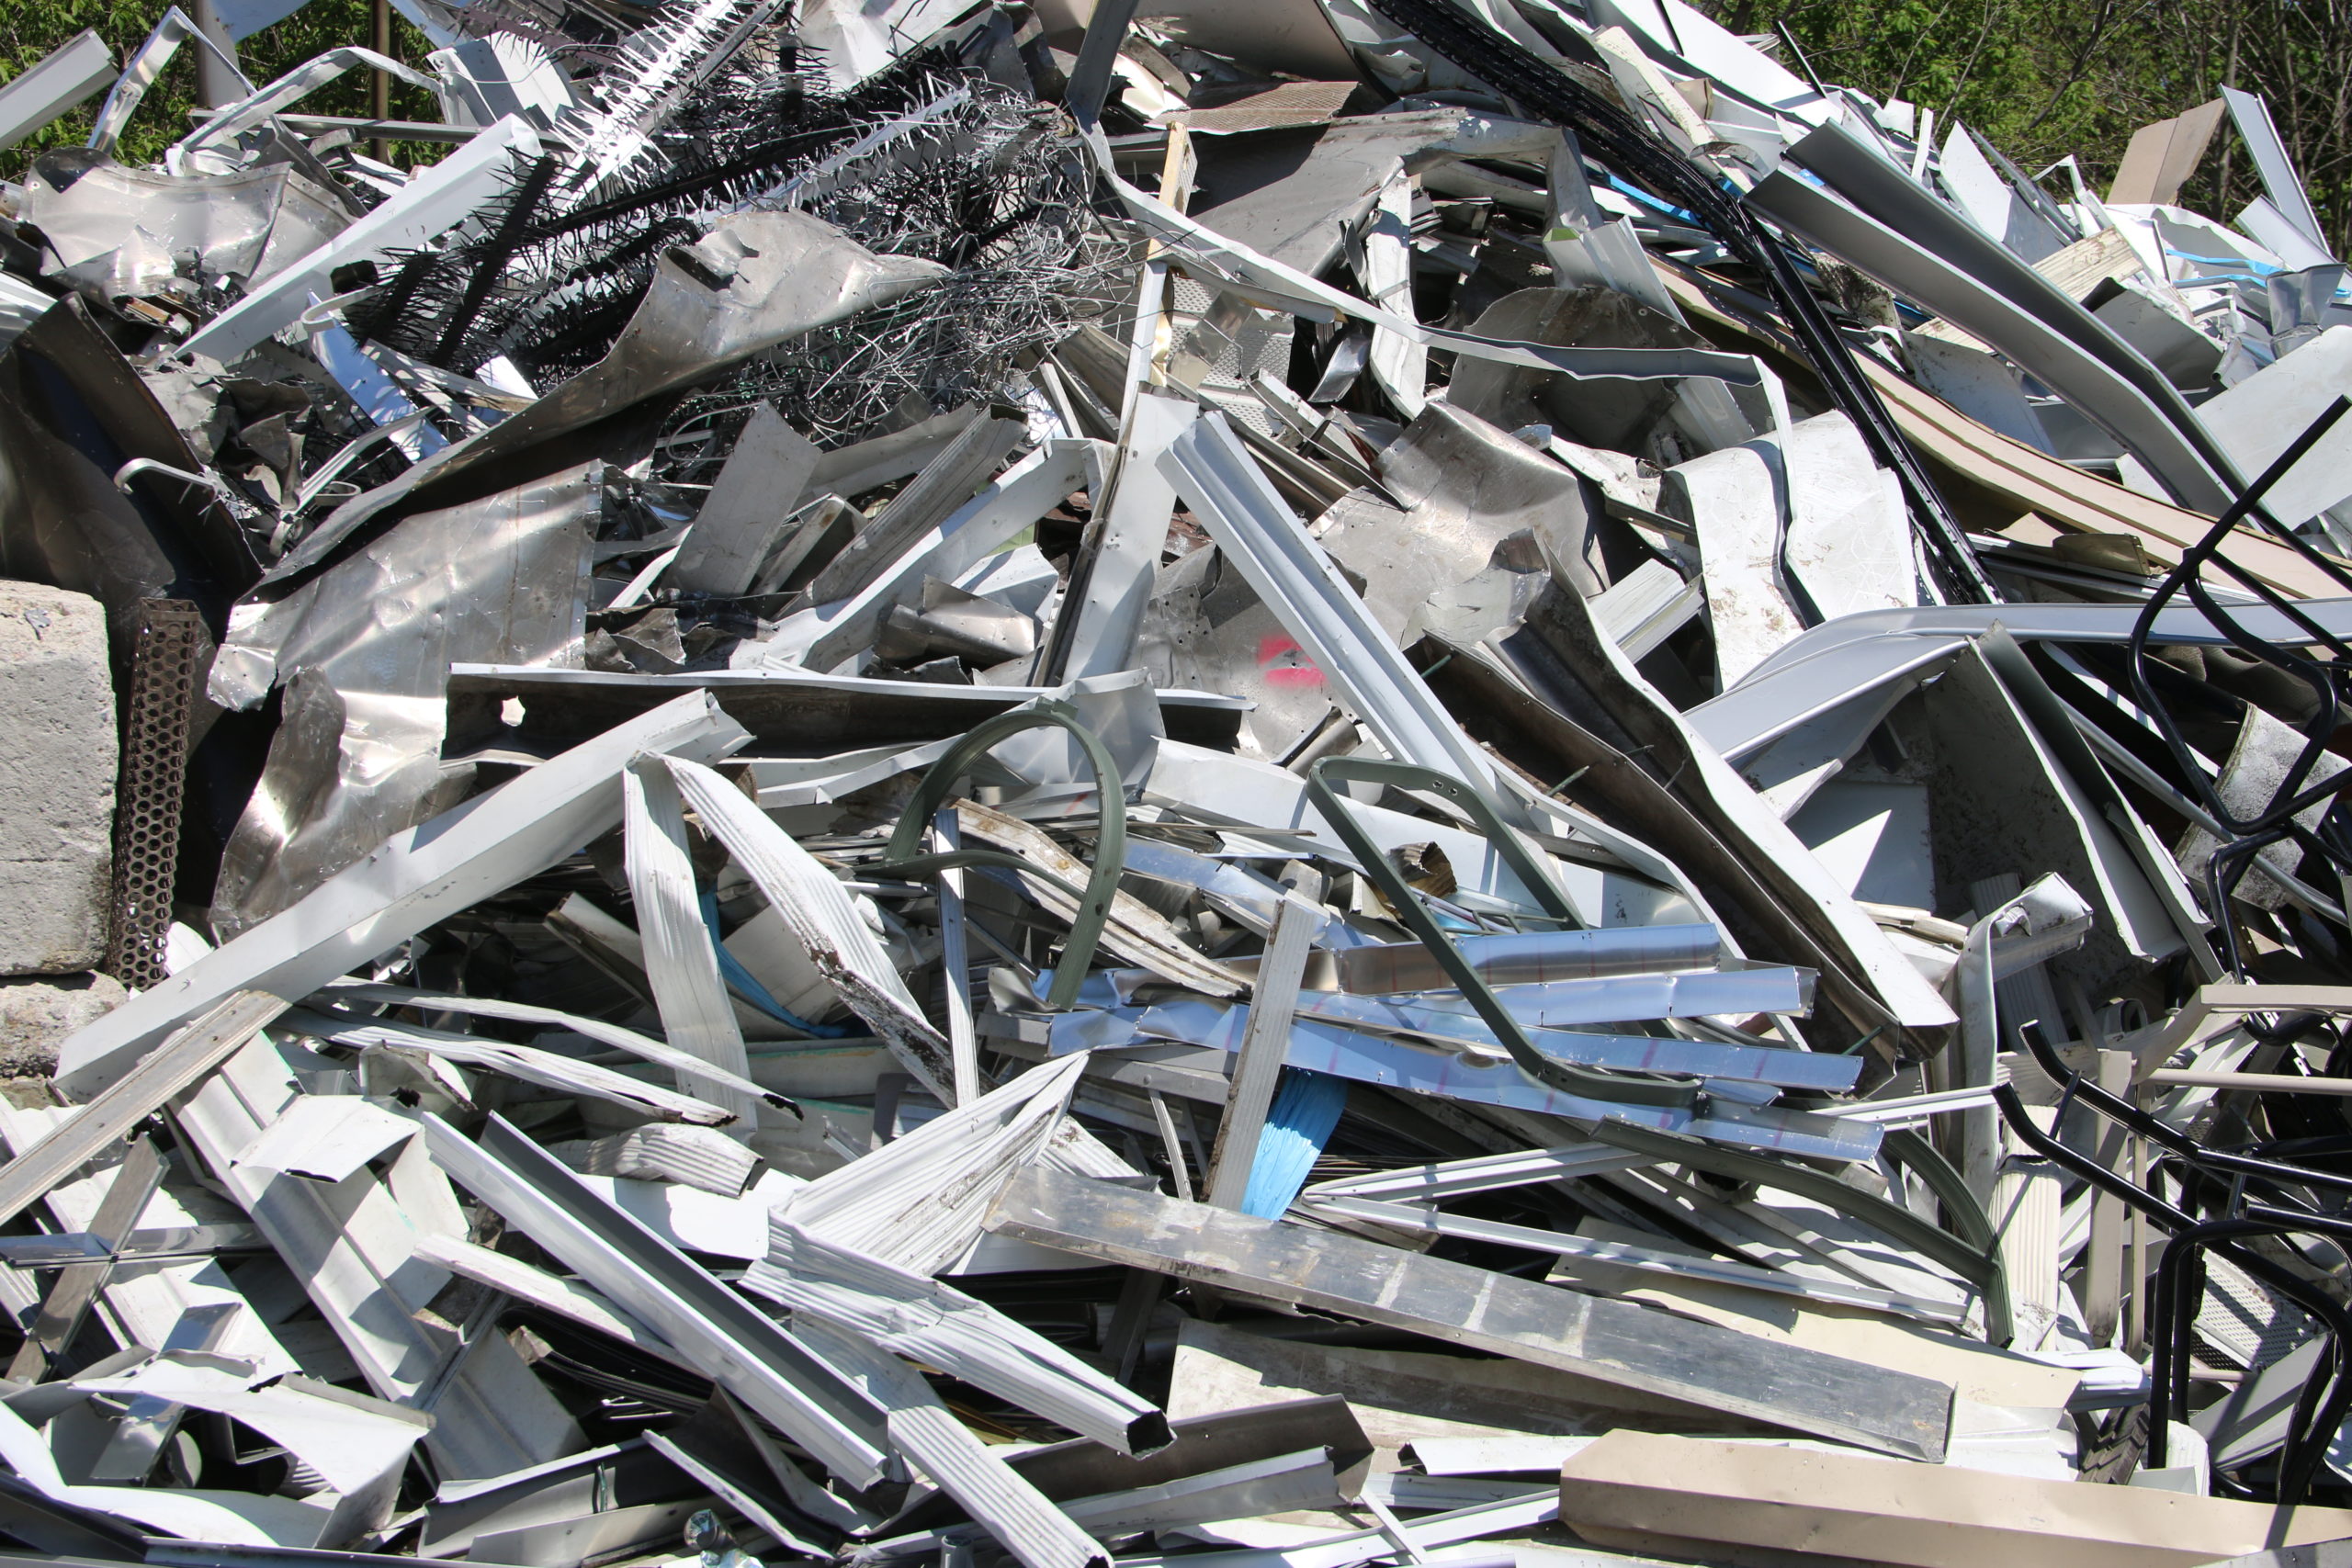 A pile of metals salvaged from construction sites await the recycling process. Photo credit: iStock.